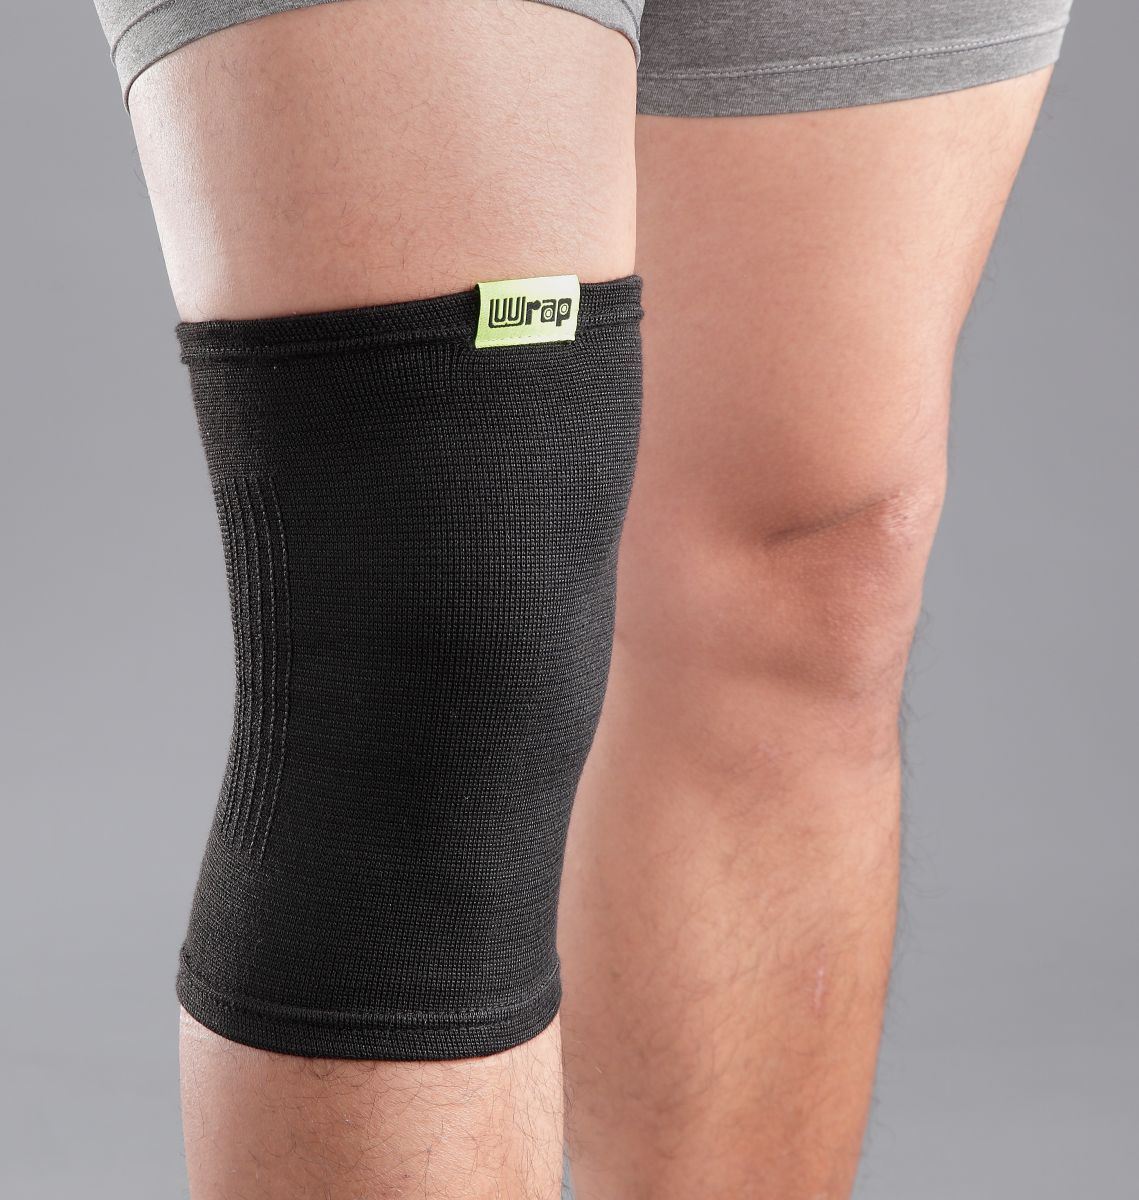 Bamboo Charcoal Knee Stabilizer